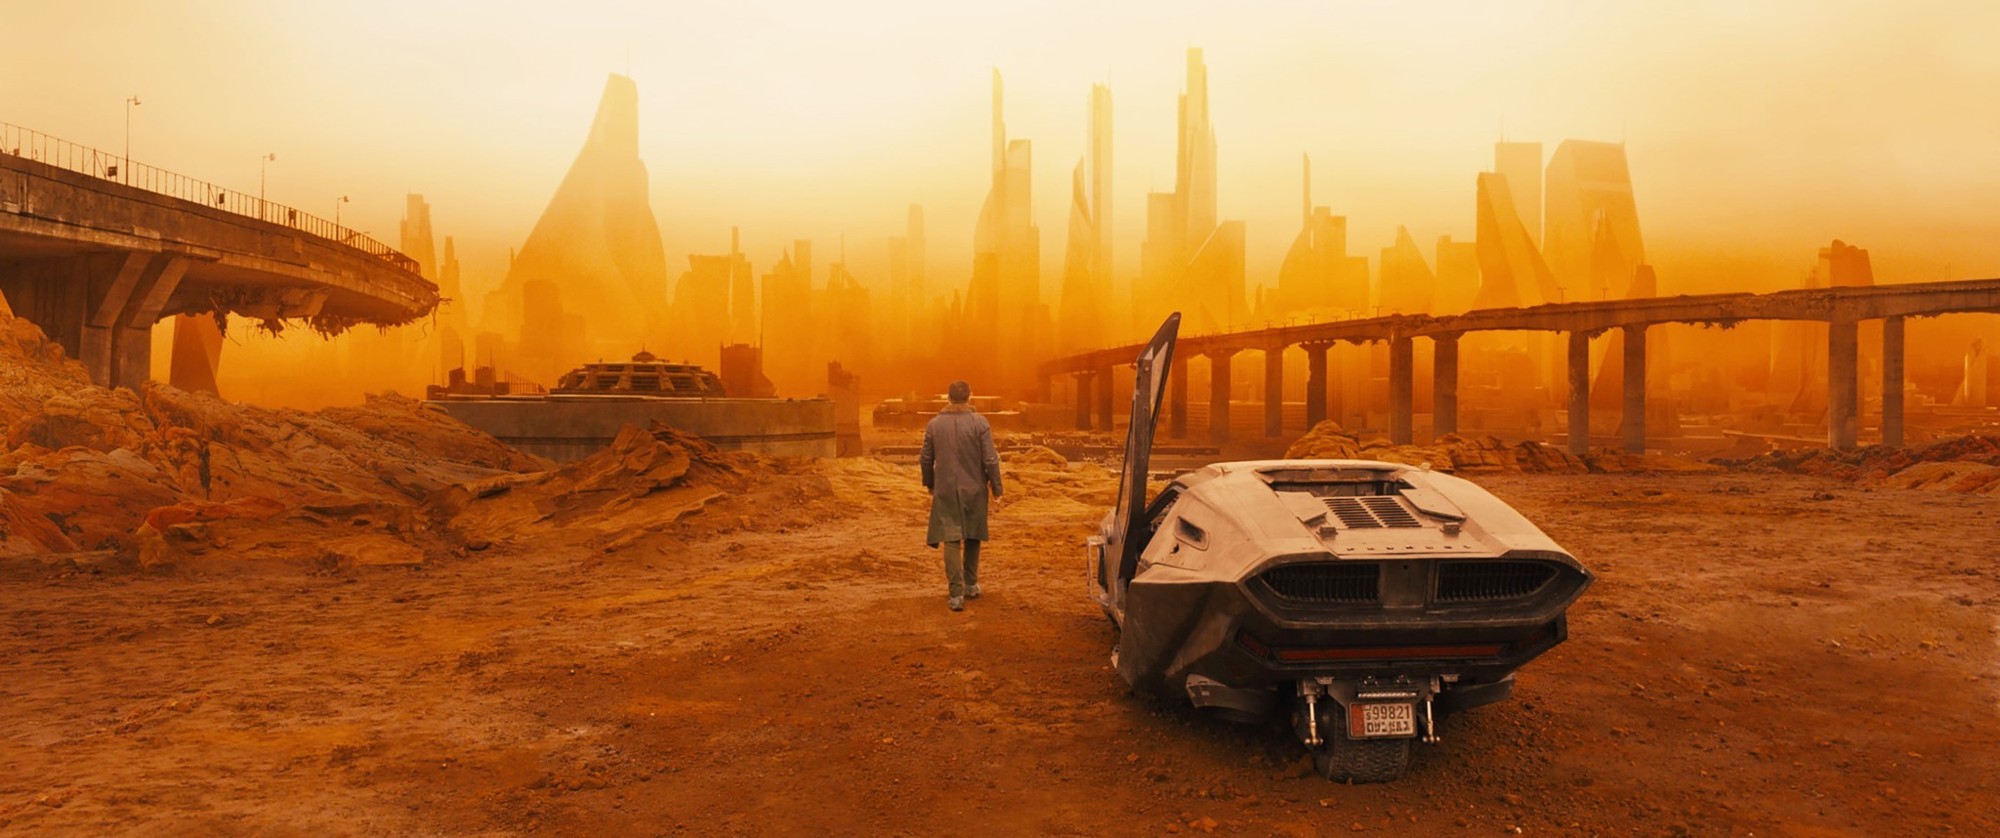 A scene from Warner Bros. Pictures' Blade Runner 2049 (2017)